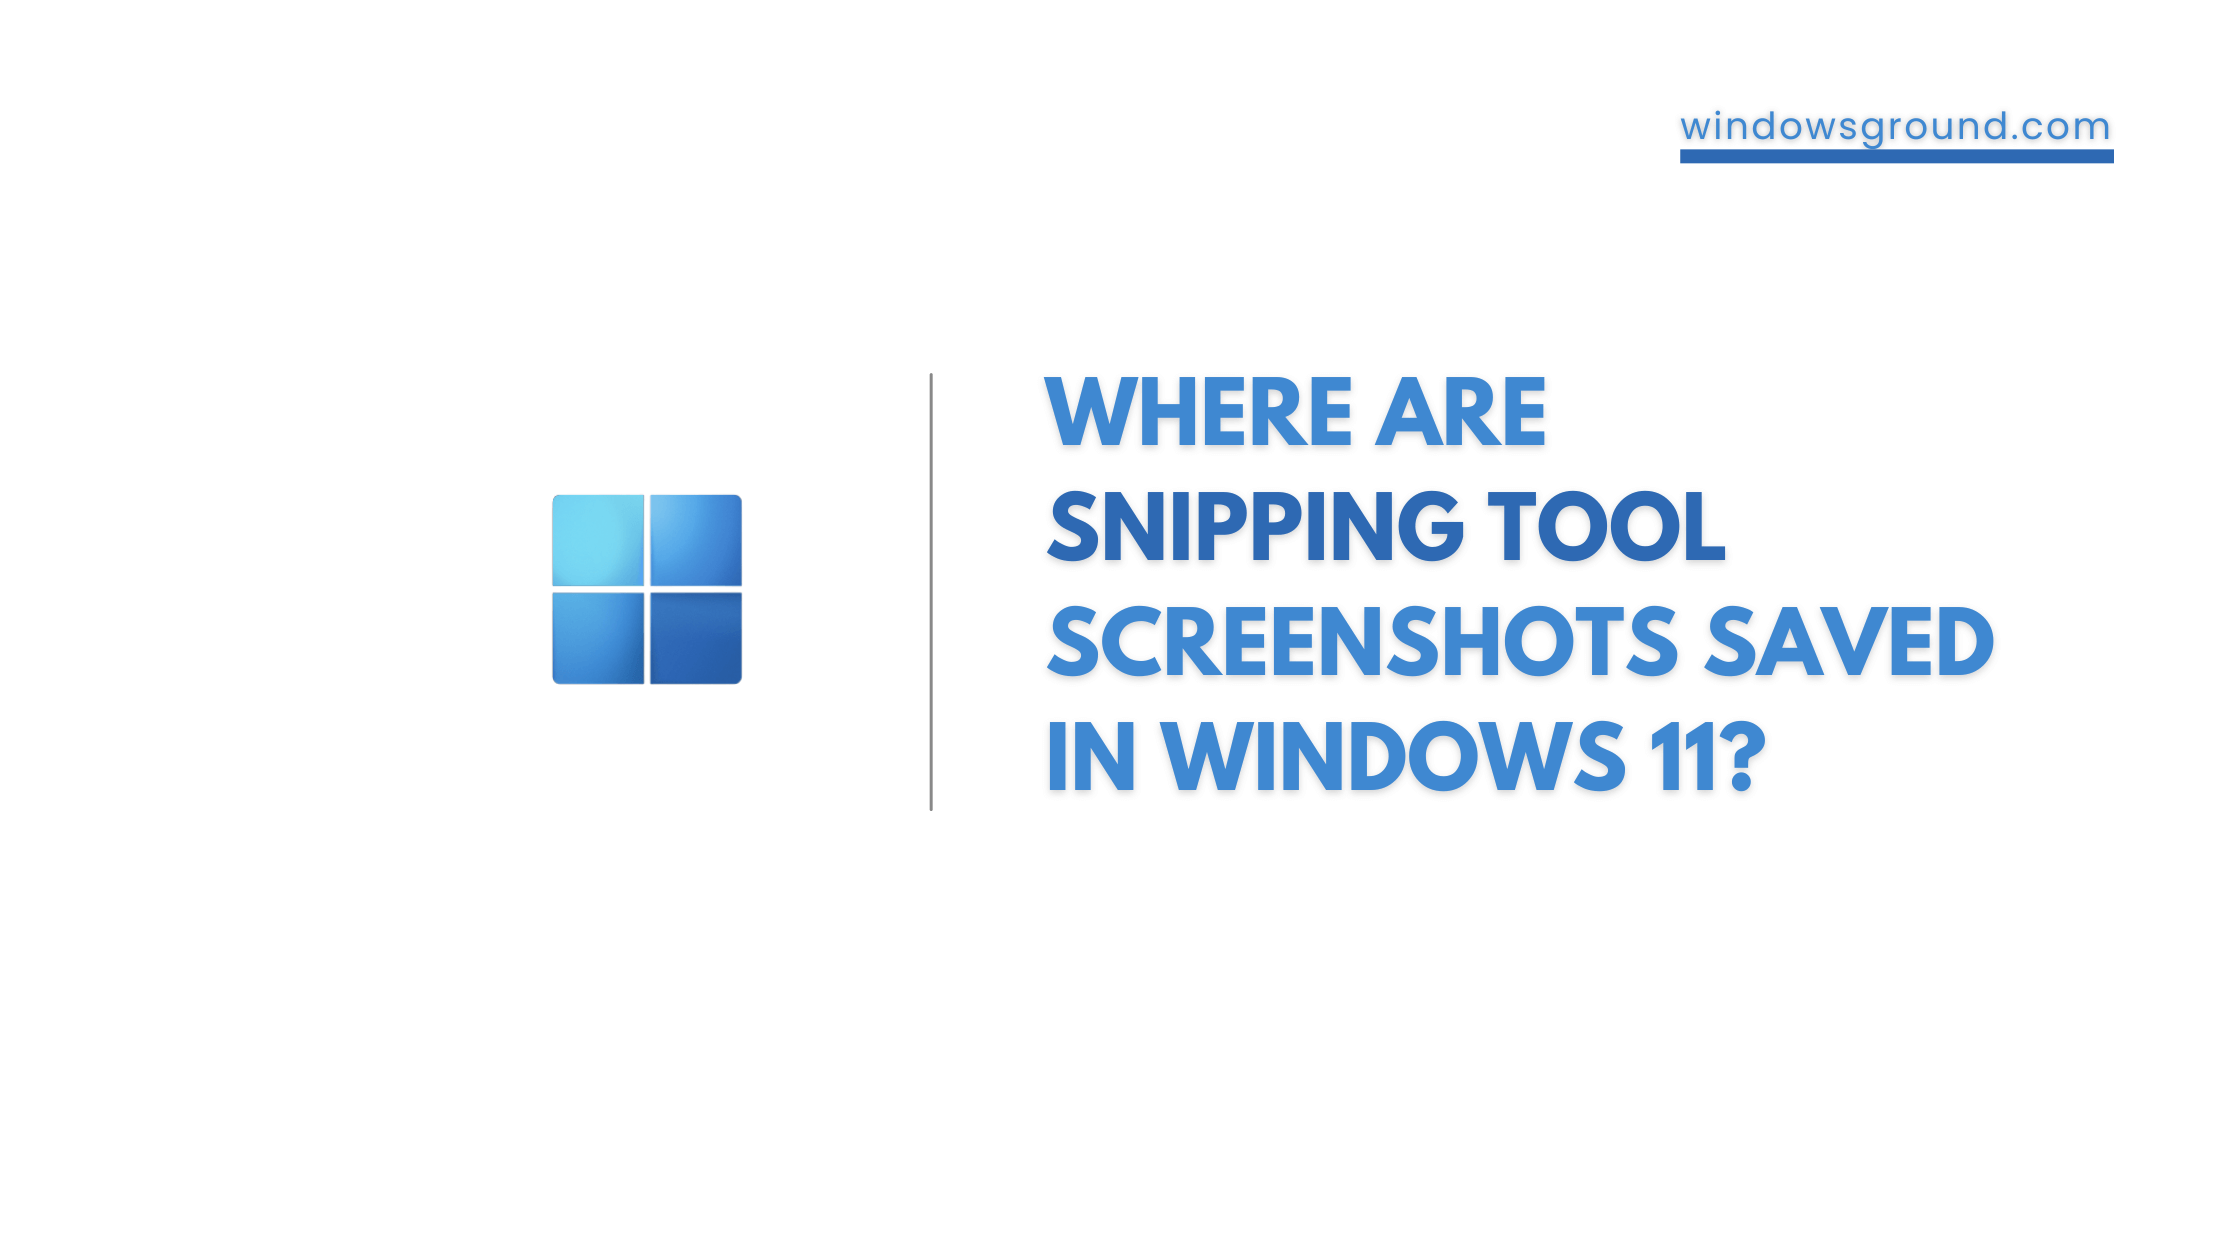 Where Are Snipping Tool Screenshots Saved In Windows 11 Snipping Tool Save Location In Windows 11 (1)